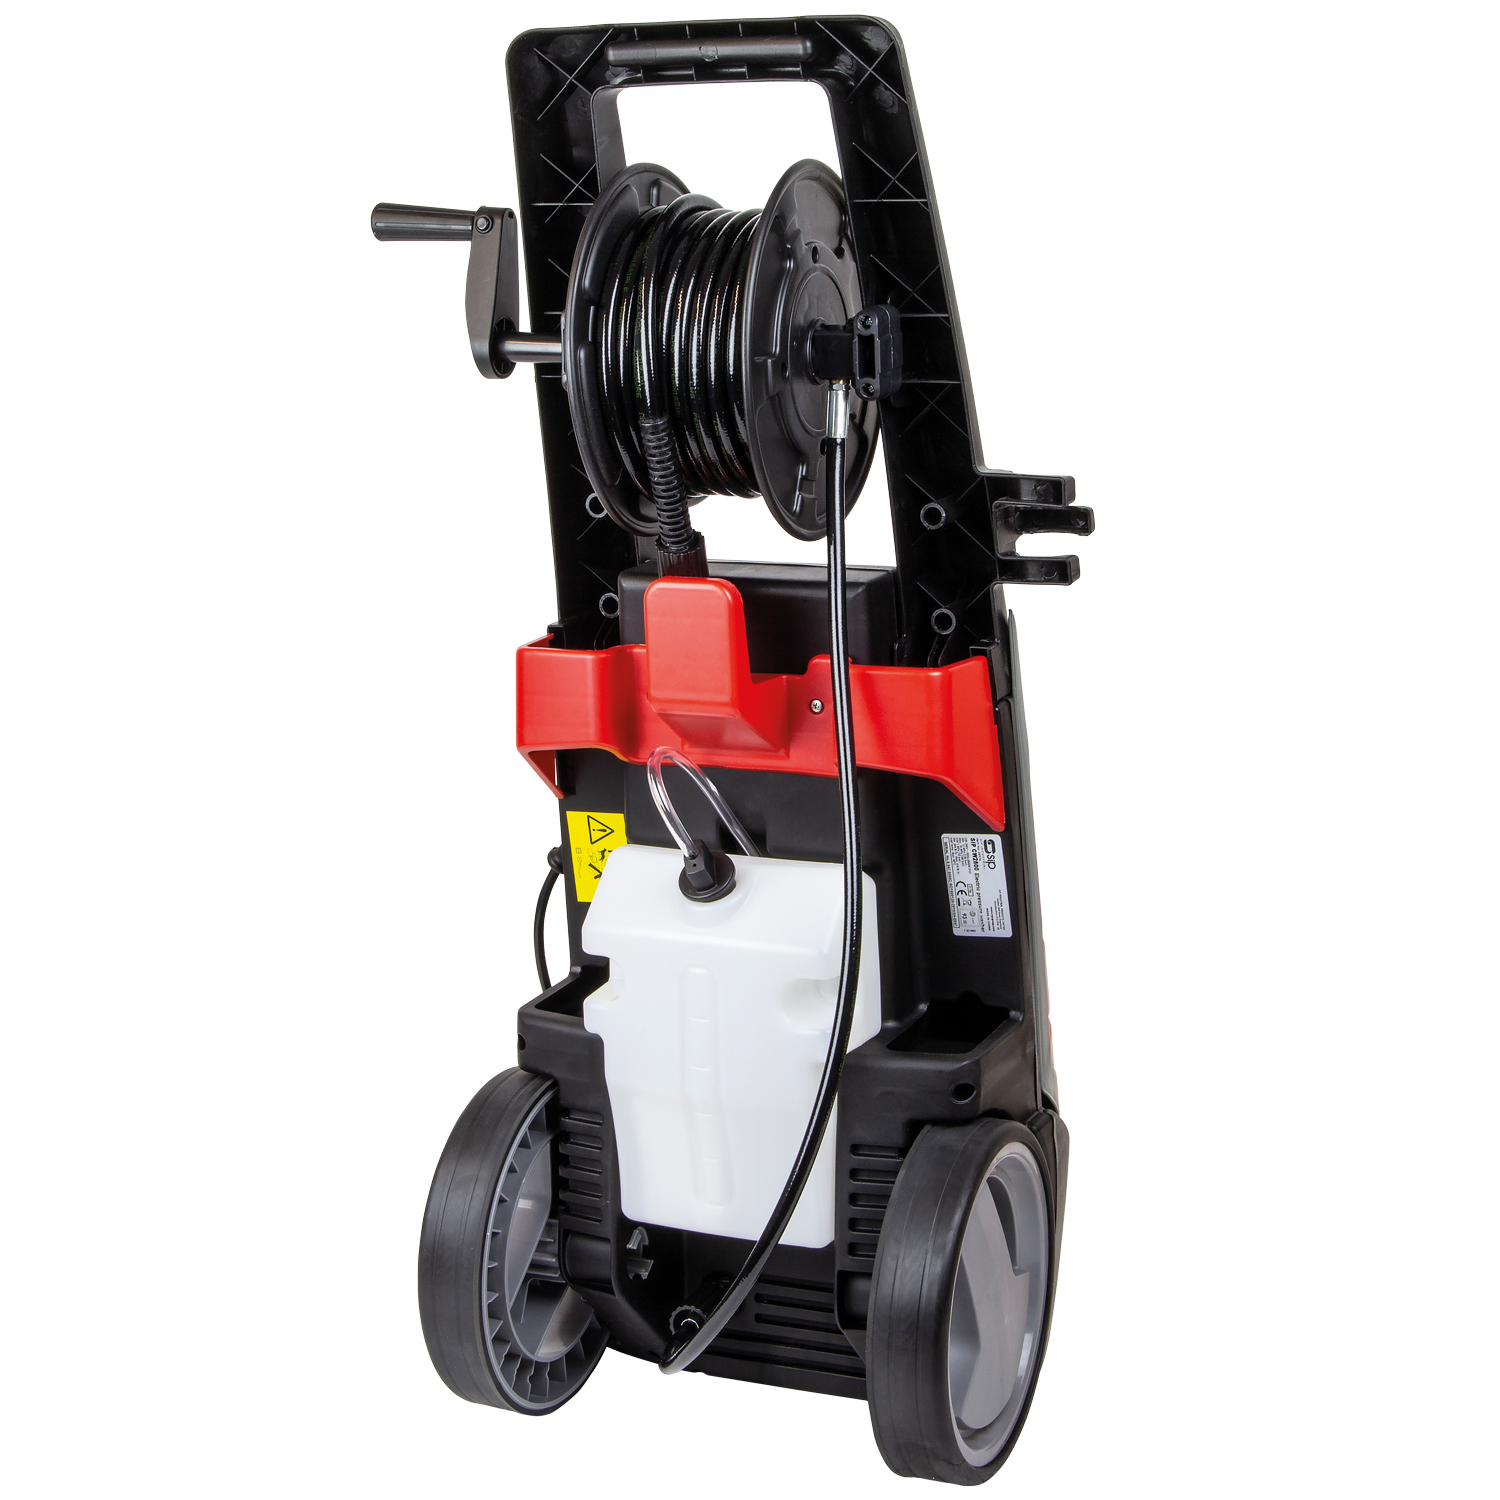 SIP CW2800 ELECTRIC PRESSURE WASHER (08974)